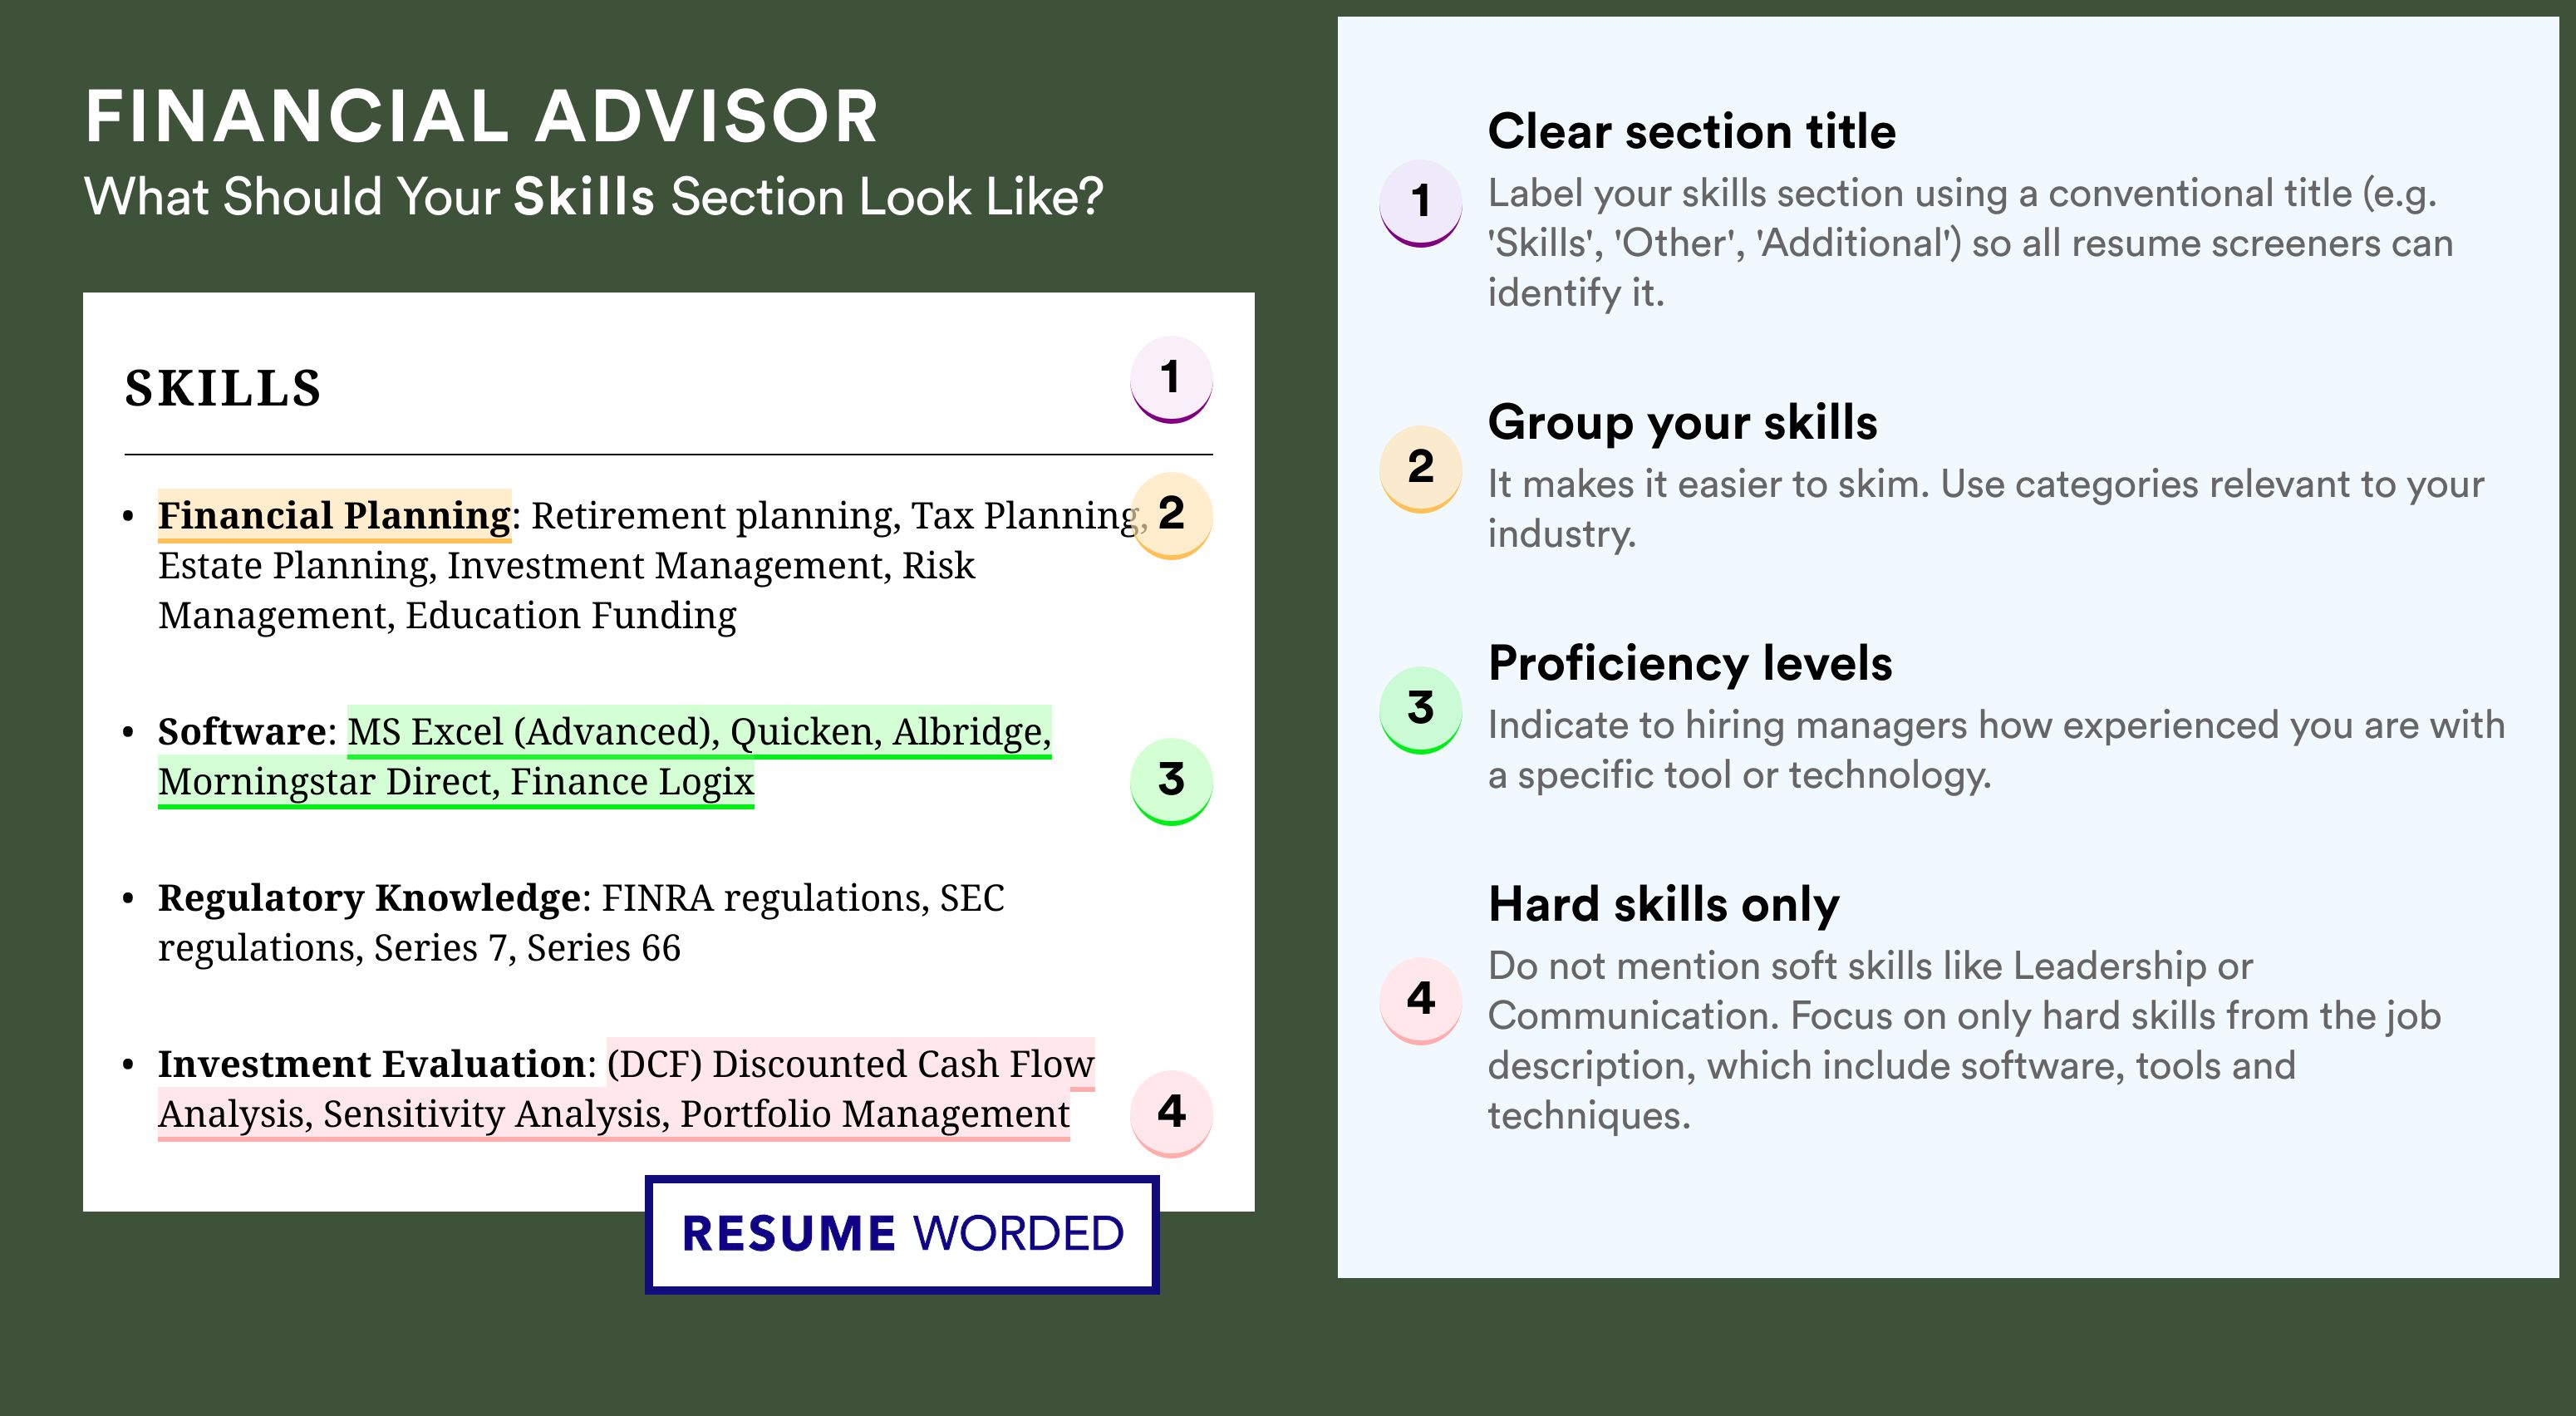 How To Write Your Skills Section - Financial Advisor Roles